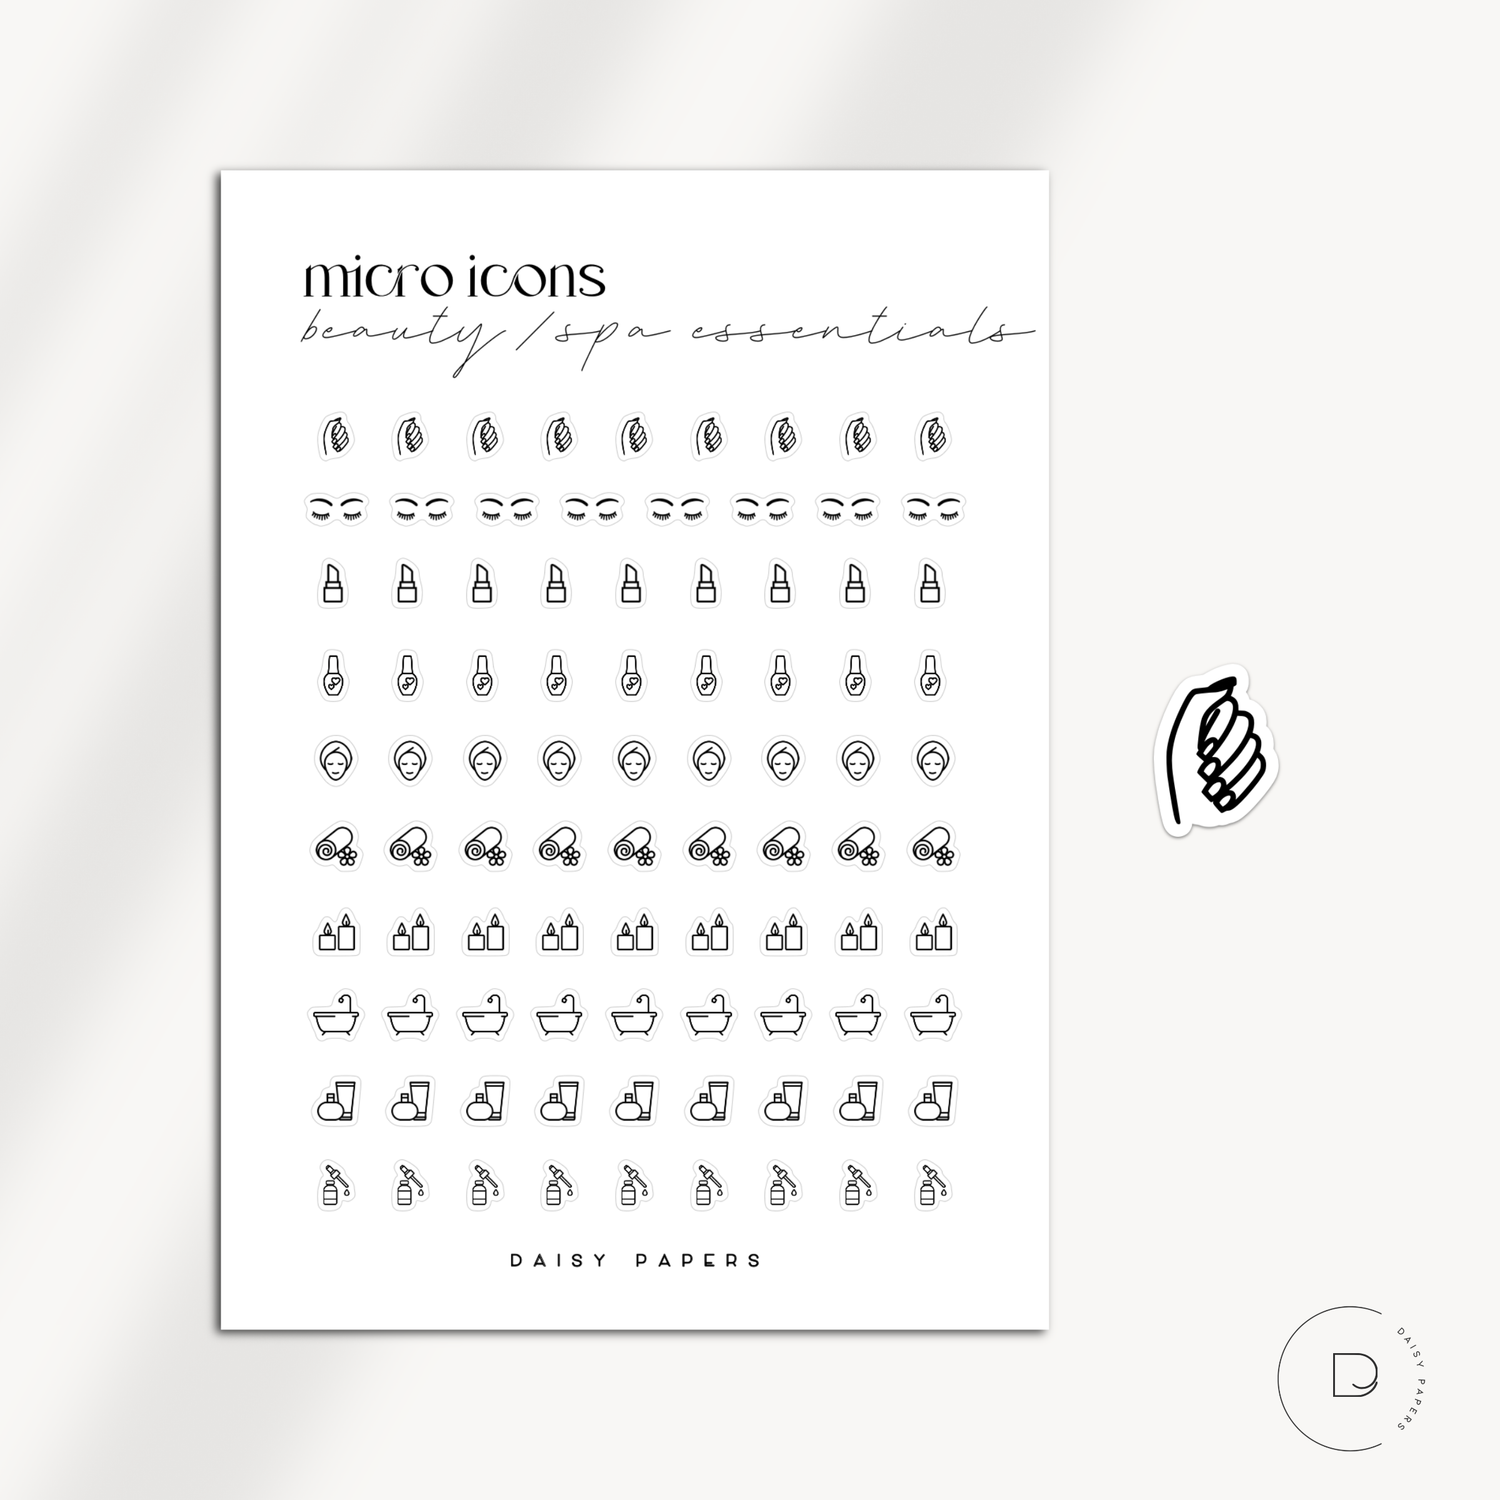 MICRO ICONS - BEAUTY / SPA ESSENTIALS